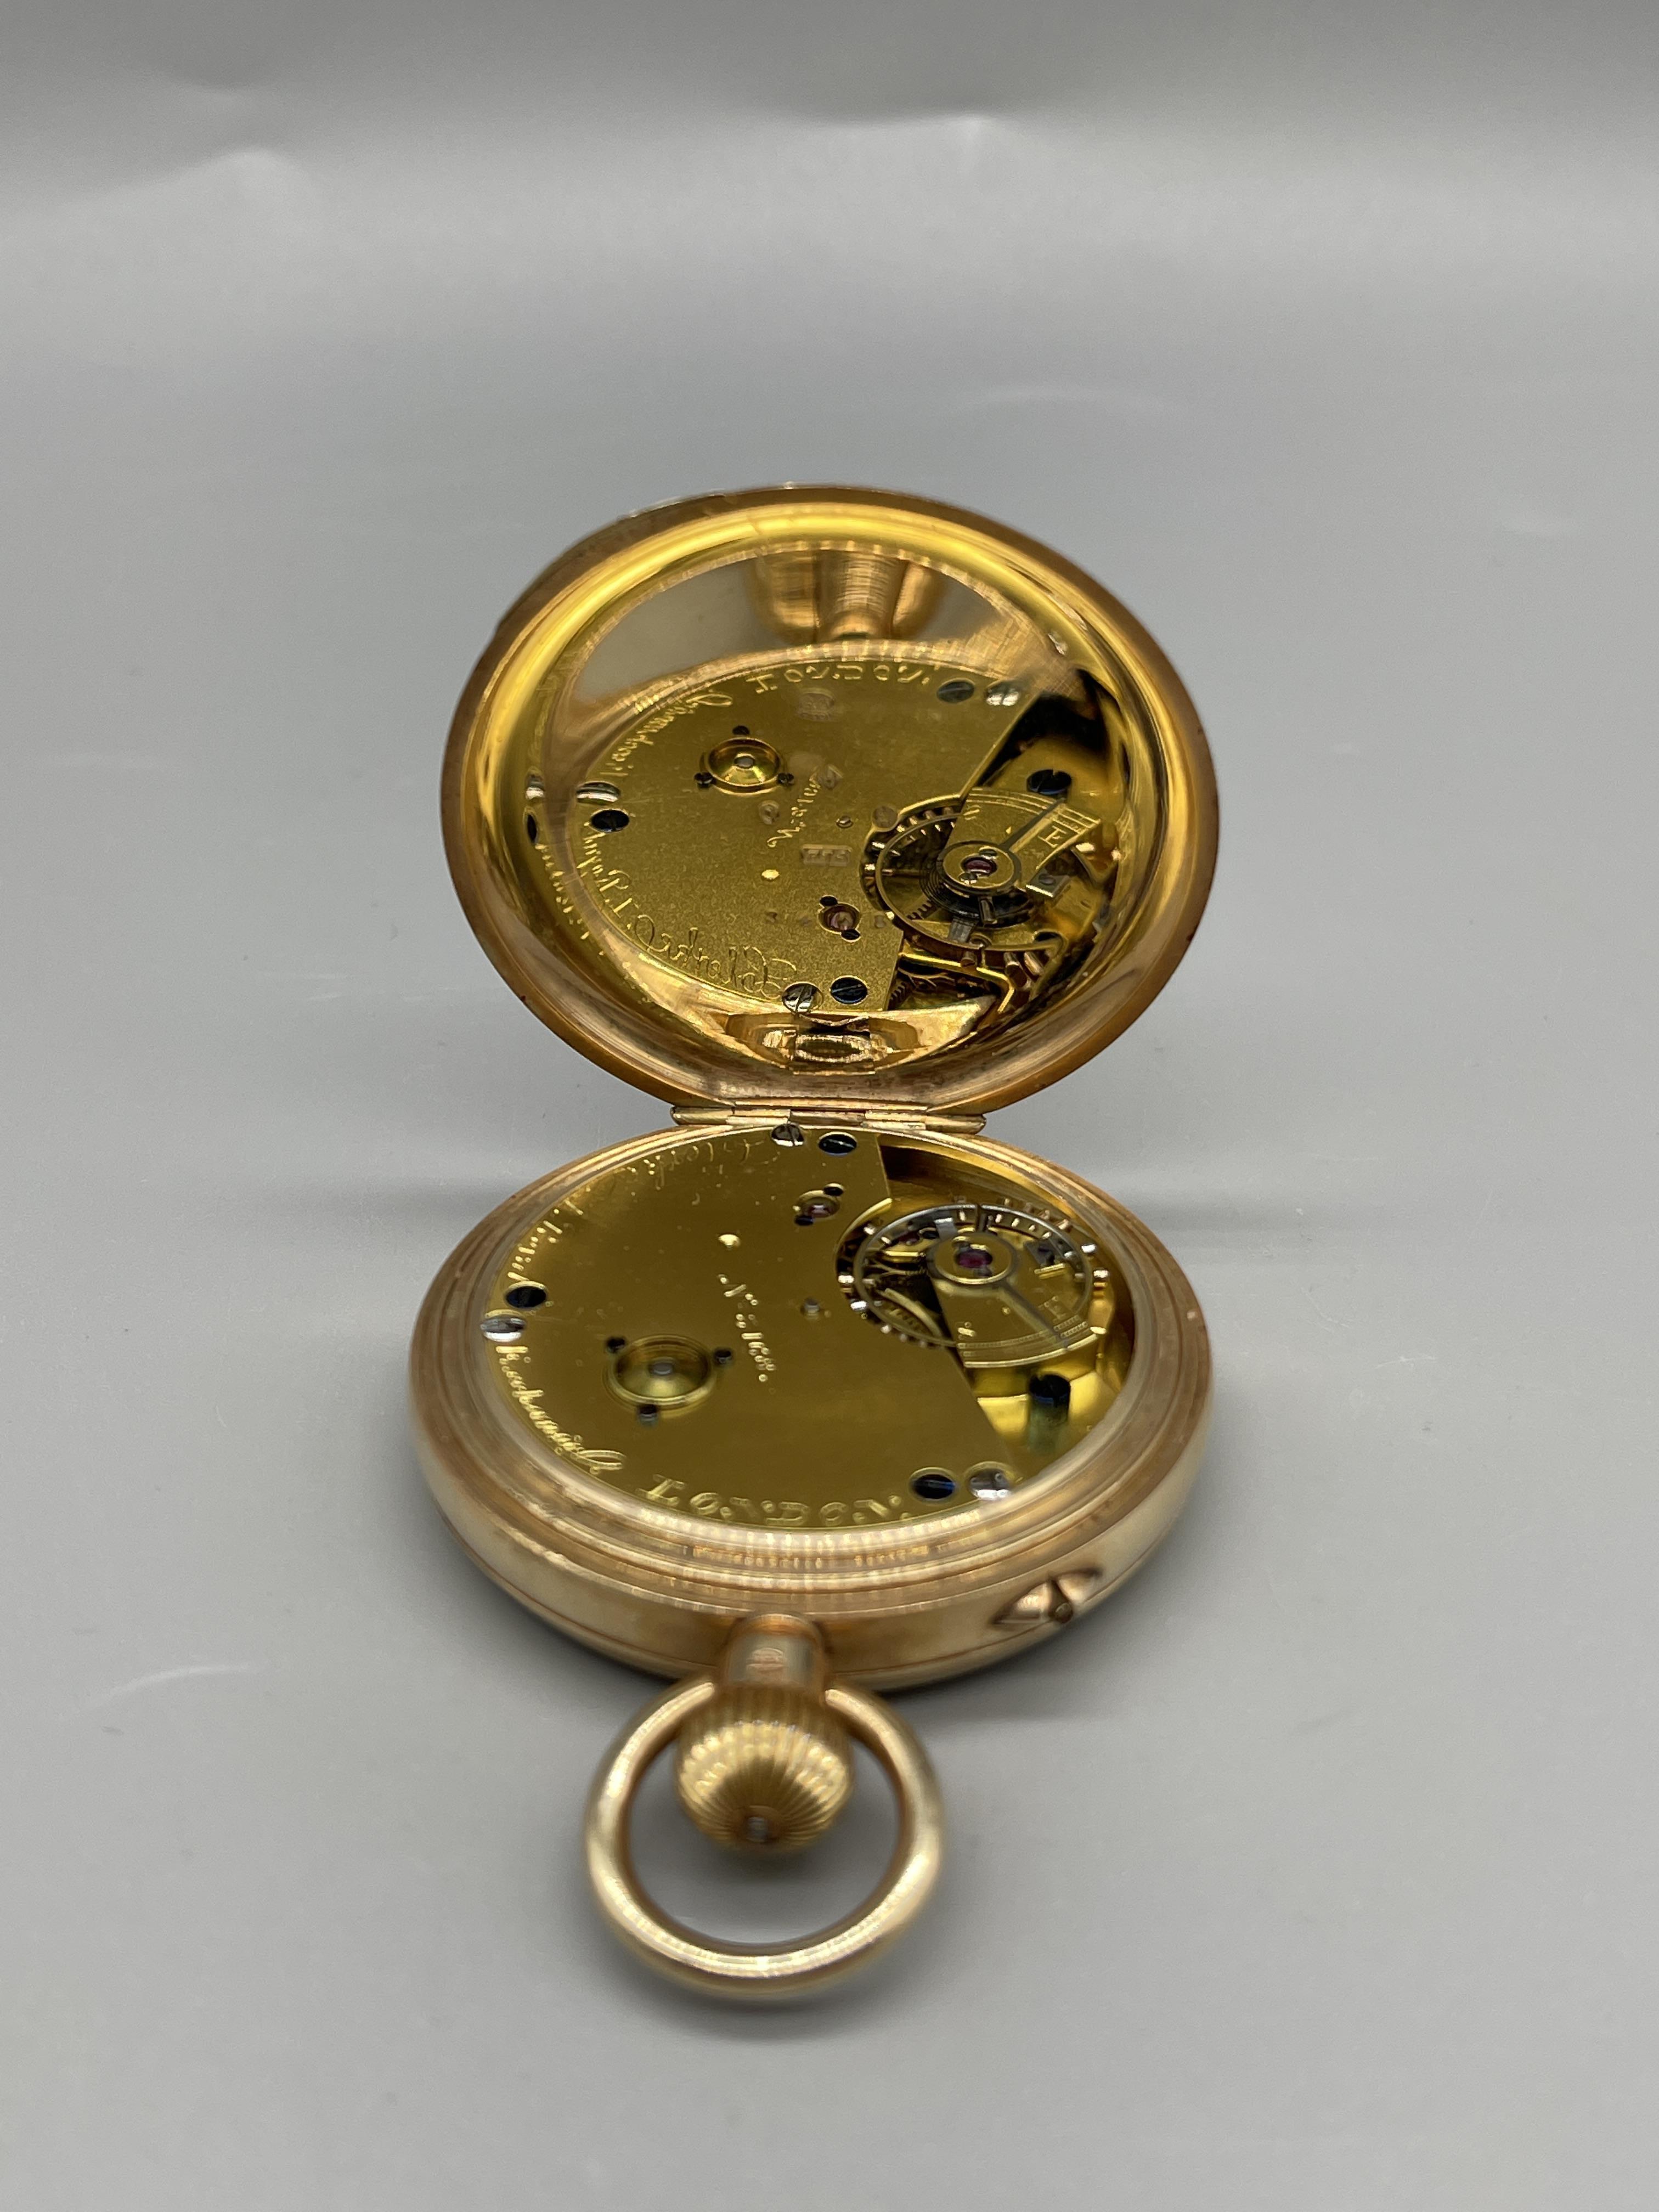 9 ct Gold pocket watch - Image 4 of 4